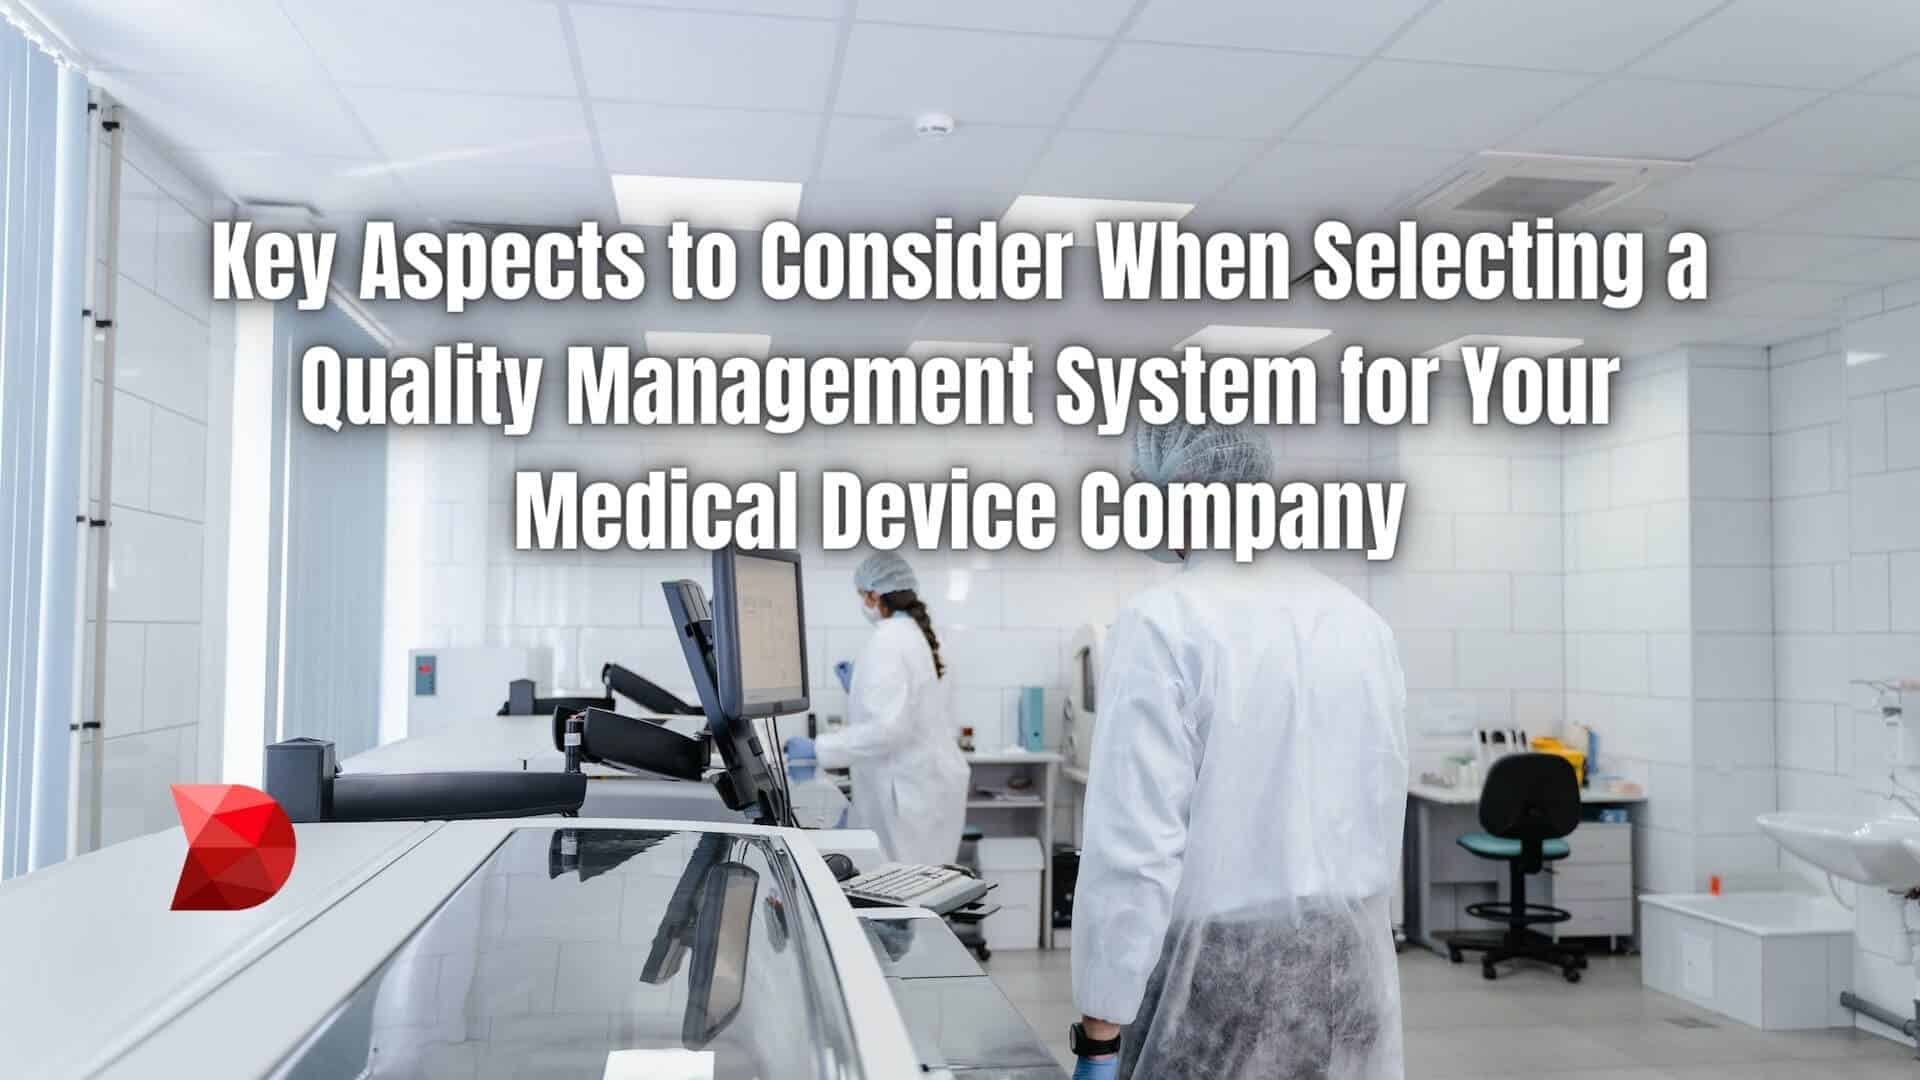 When selecting a QMS for your medical device company, several essential factors must be considered. Learn about the key aspects to consider!